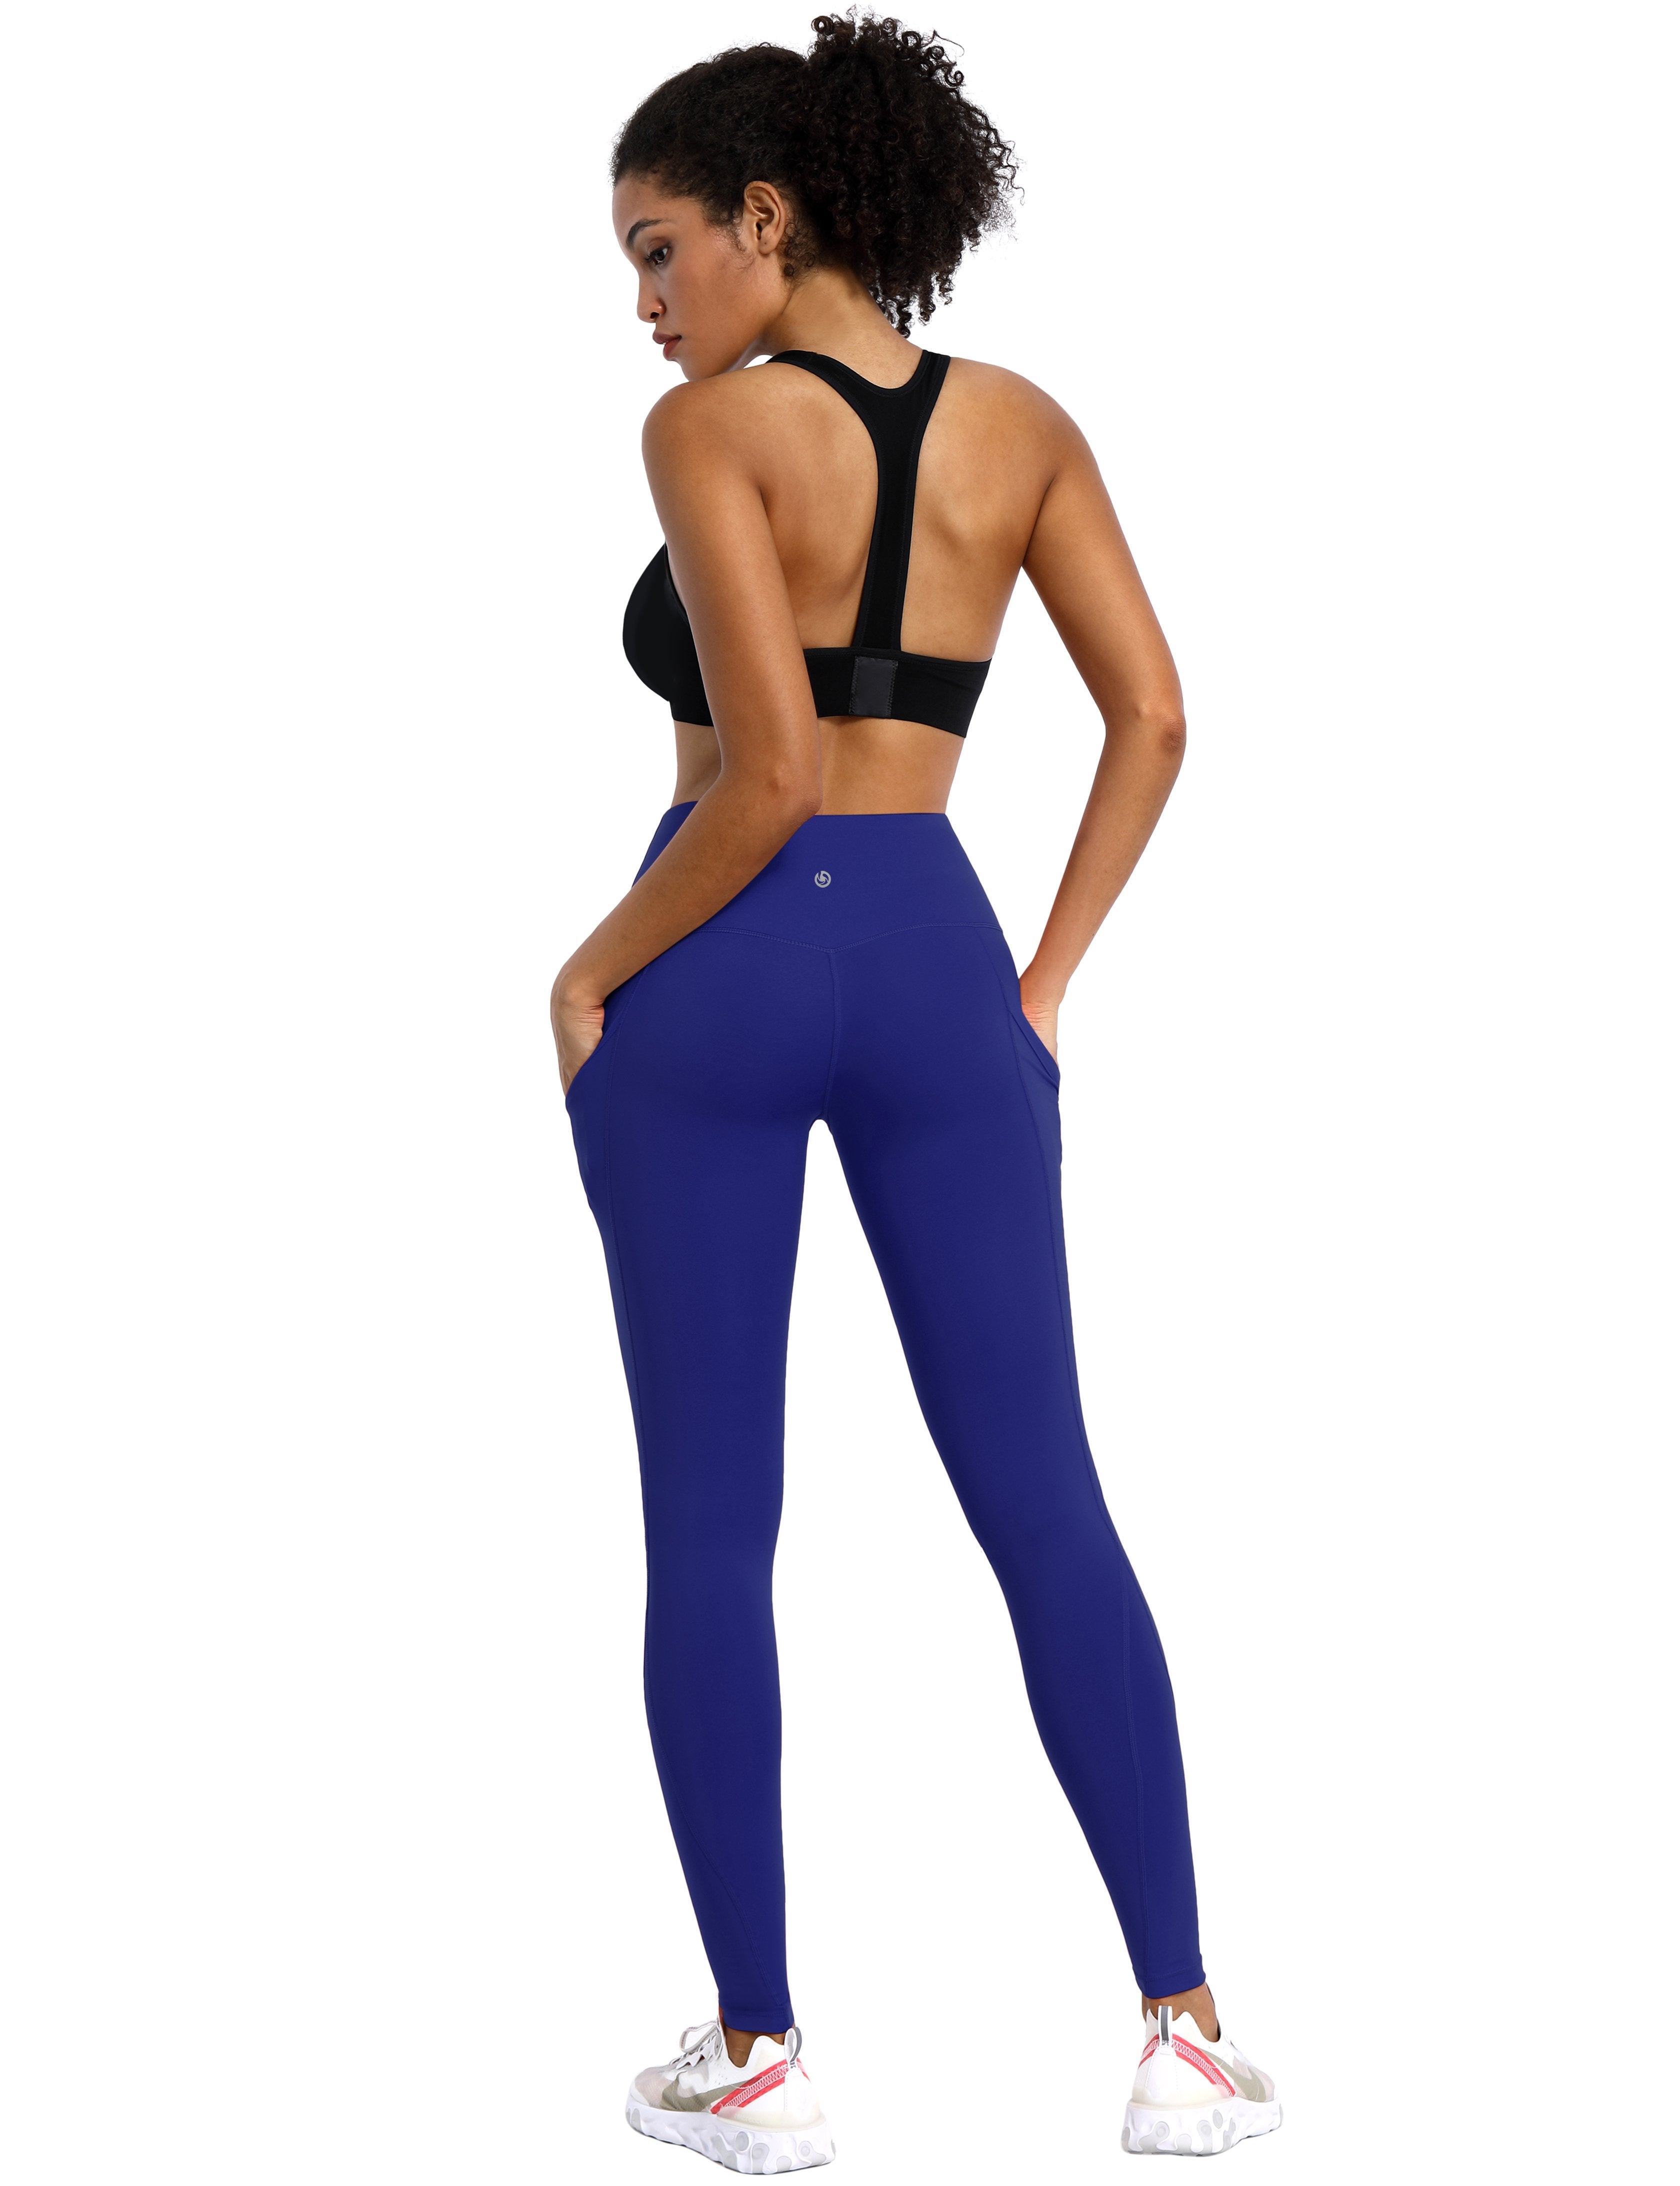 High Waist Side Pockets Jogging Pants navy 75% Nylon, 25% Spandex Fabric doesn't attract lint easily 4-way stretch No see-through Moisture-wicking Tummy control Inner pocket